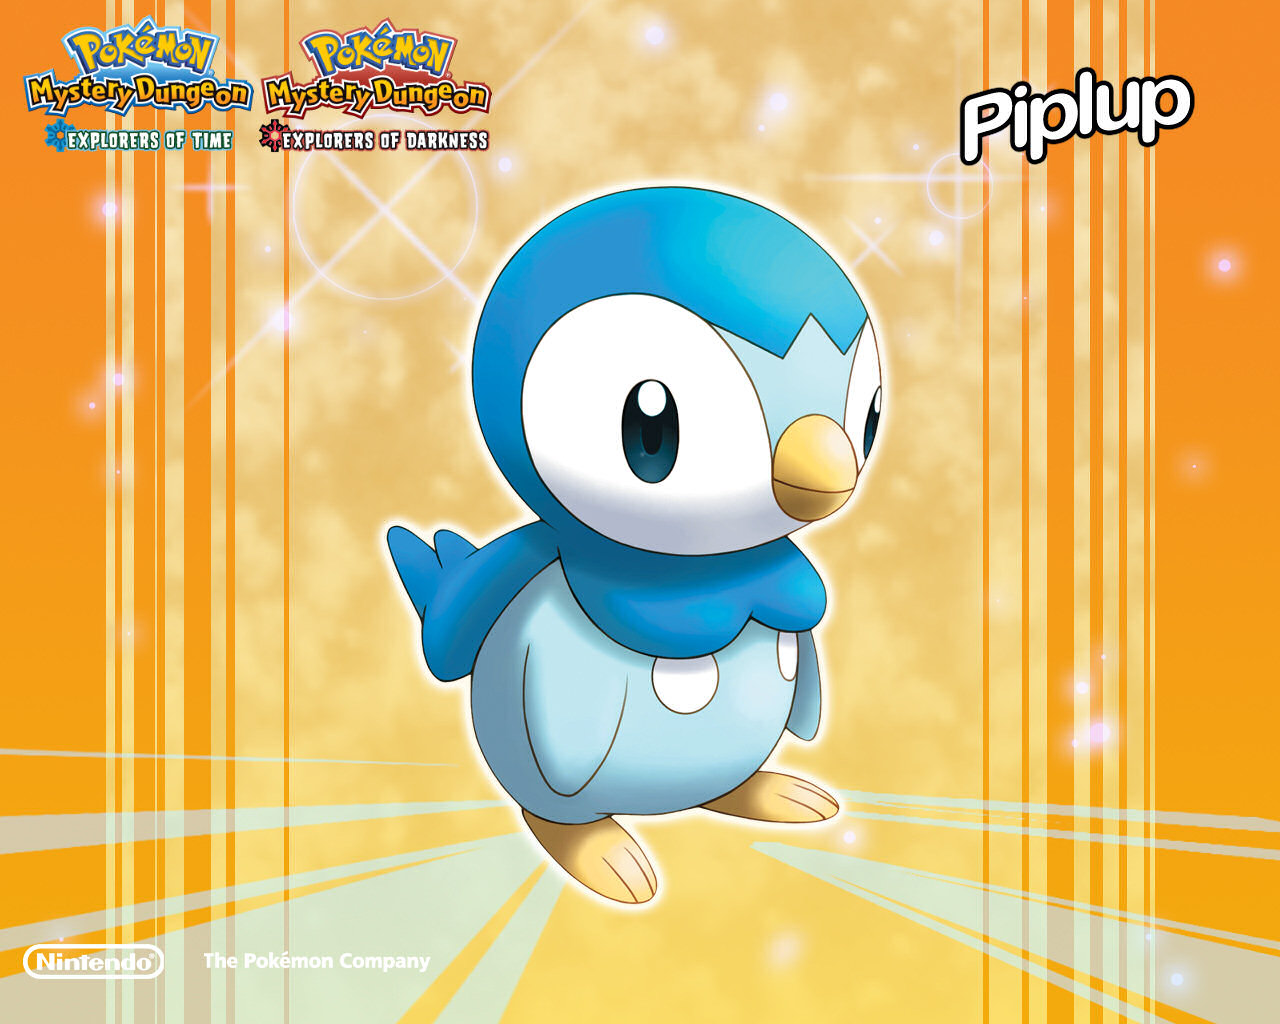 Piplup Pokemon Wallpaper - Pokemon Mystery Dungeon Piplup , HD Wallpaper & Backgrounds